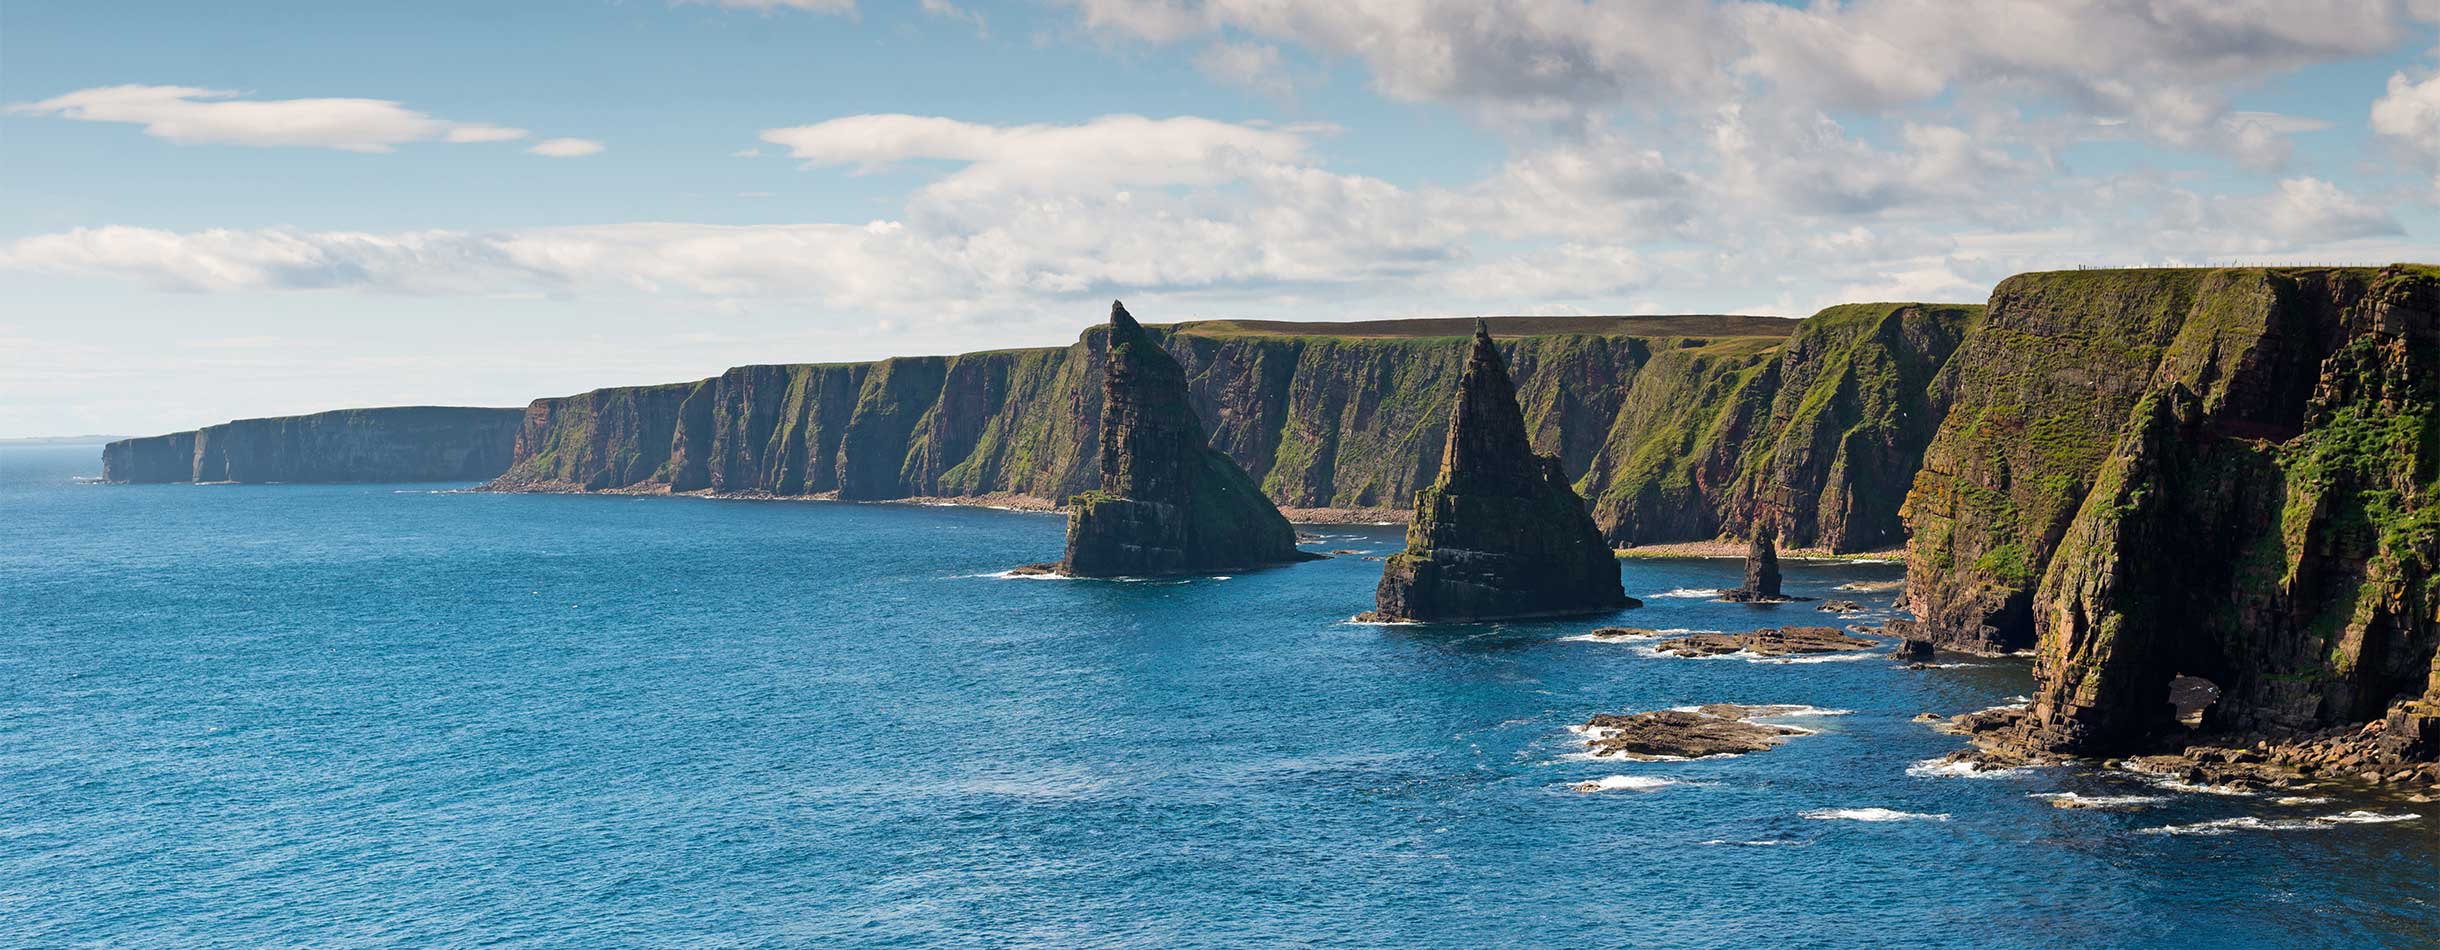 Duncansby sea stacks, Scotland